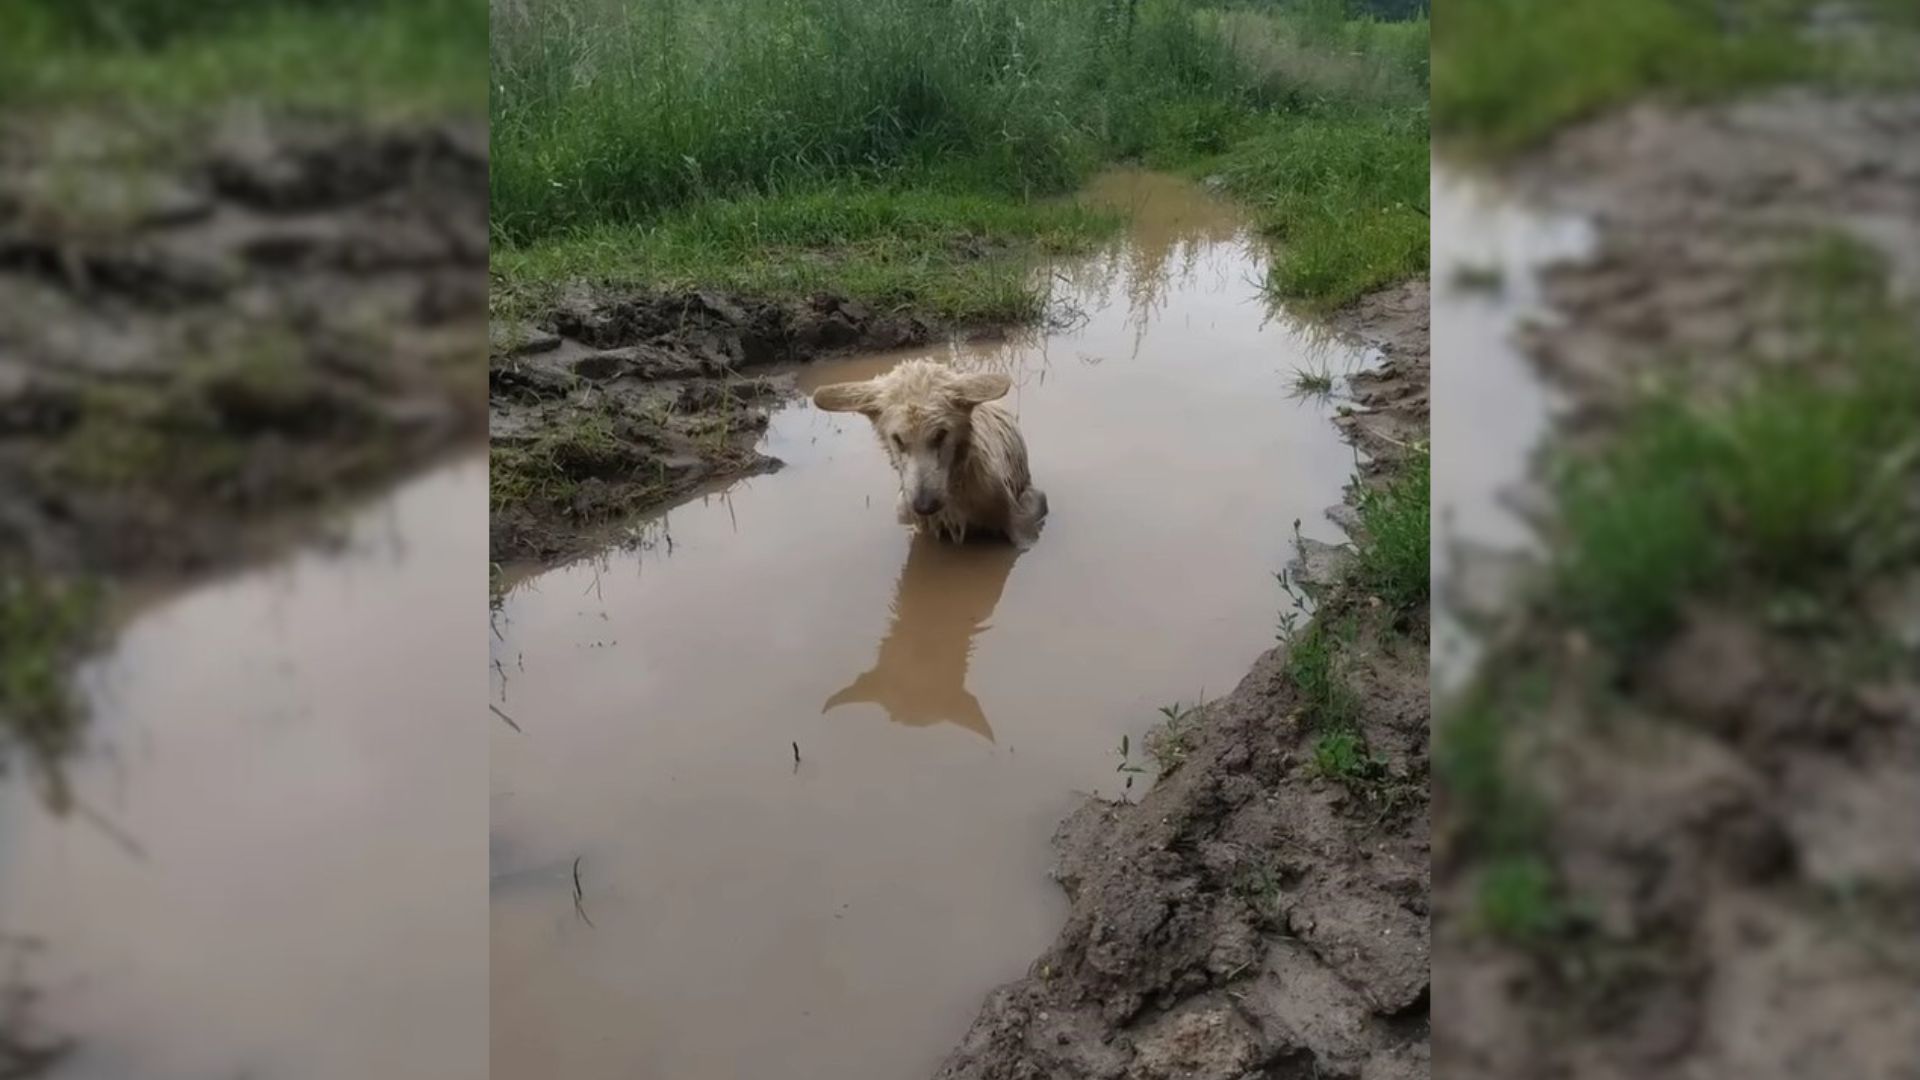 Injured Pup With The Saddest Eyes Was Found Trapped In A Puddle, Begging For Help